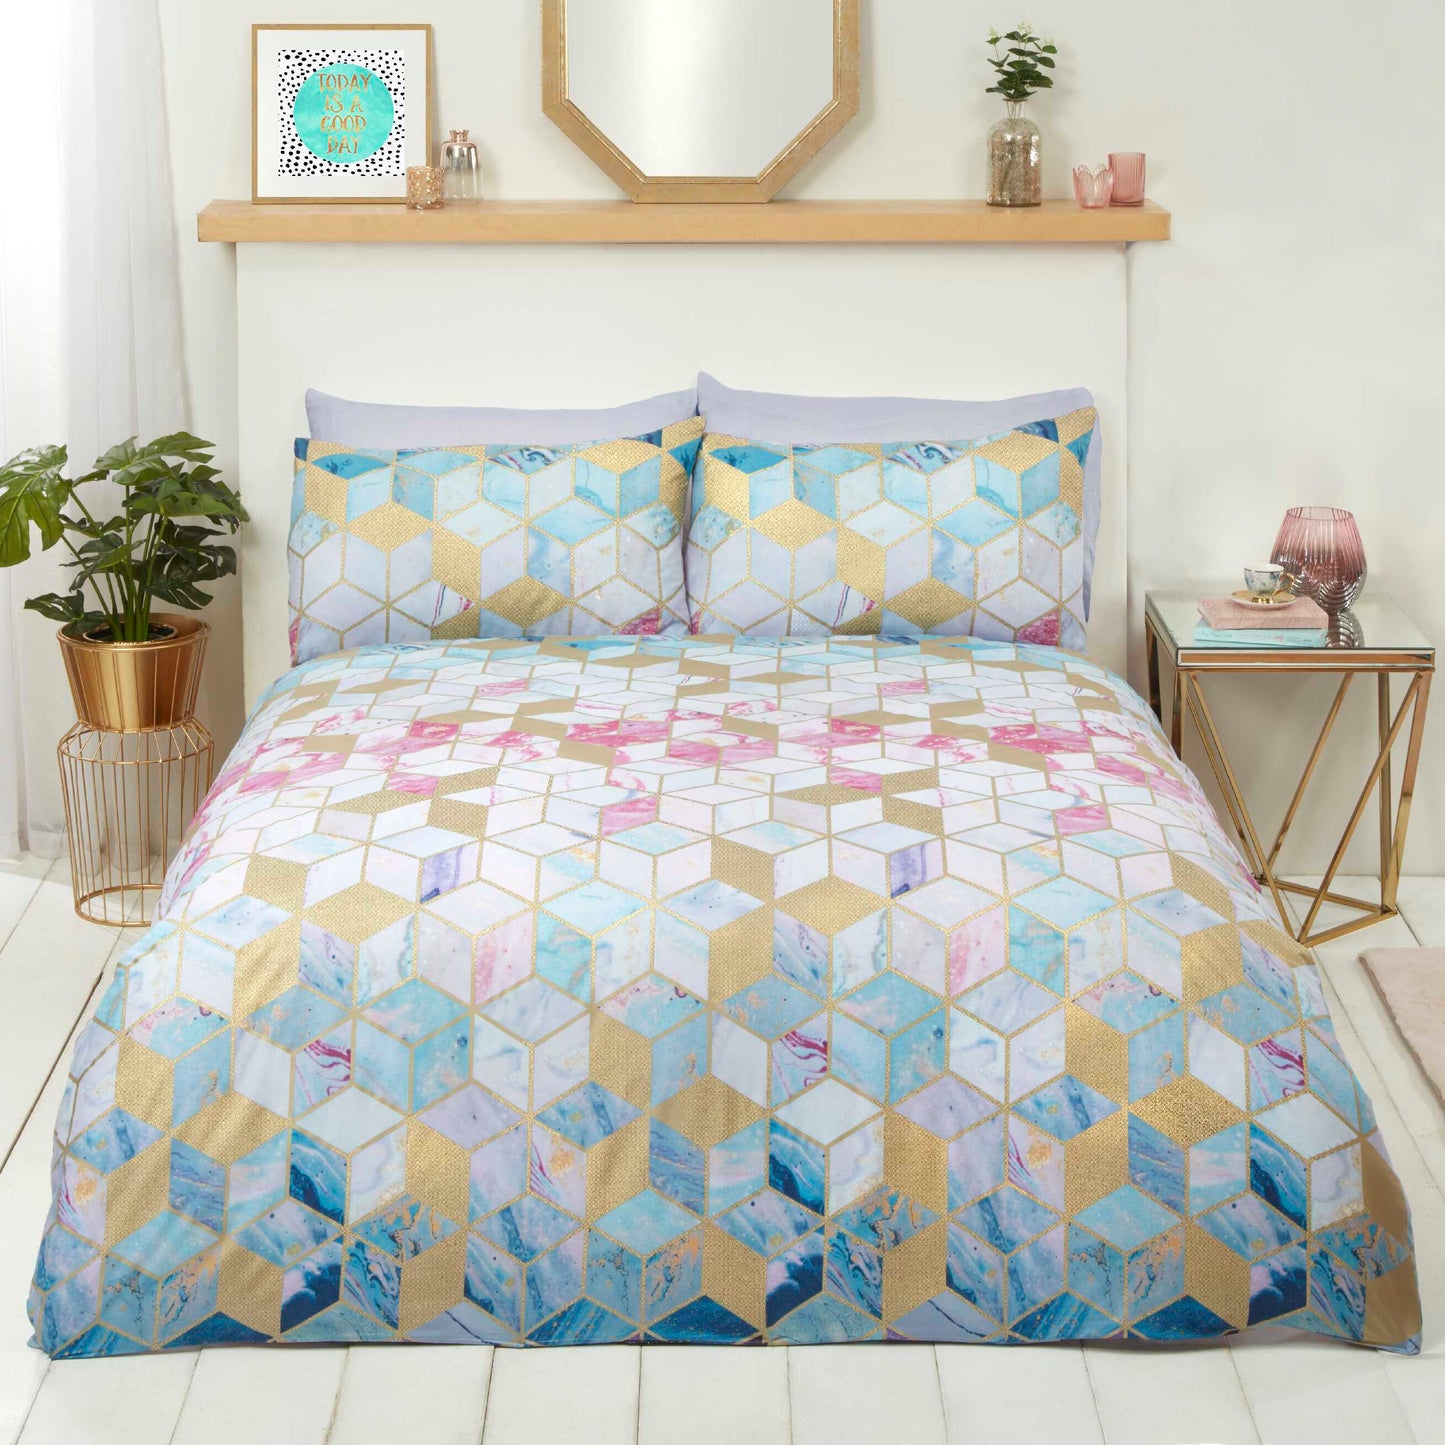 Quartz Rapport bedding. Geometric cubes with turquoise, pink and gold accents